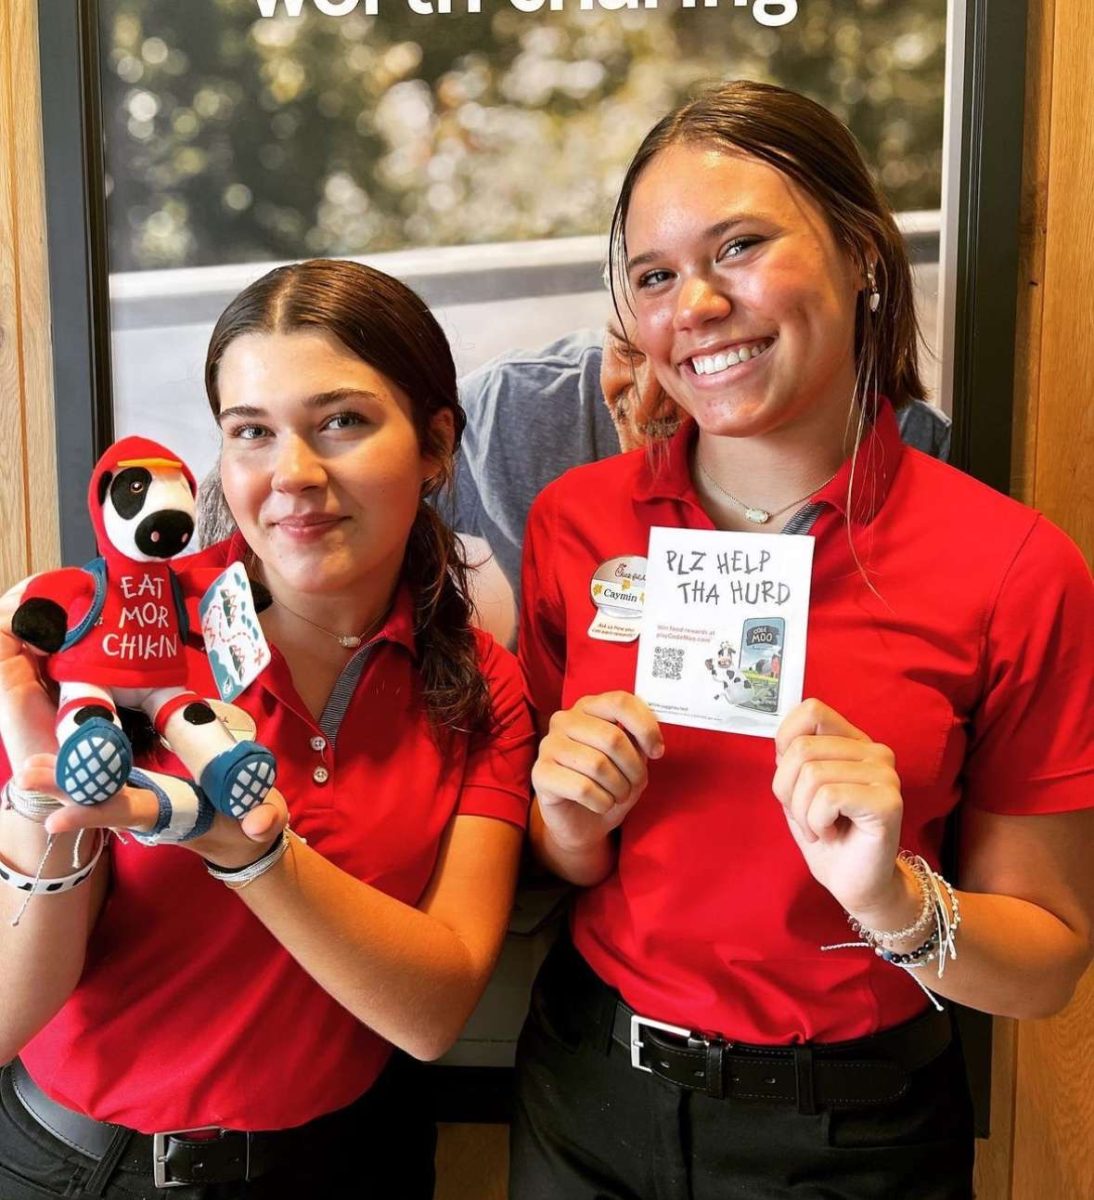 Junior Caymin Fox in her Chick-fil-A uniform with her co-worker Alicia.